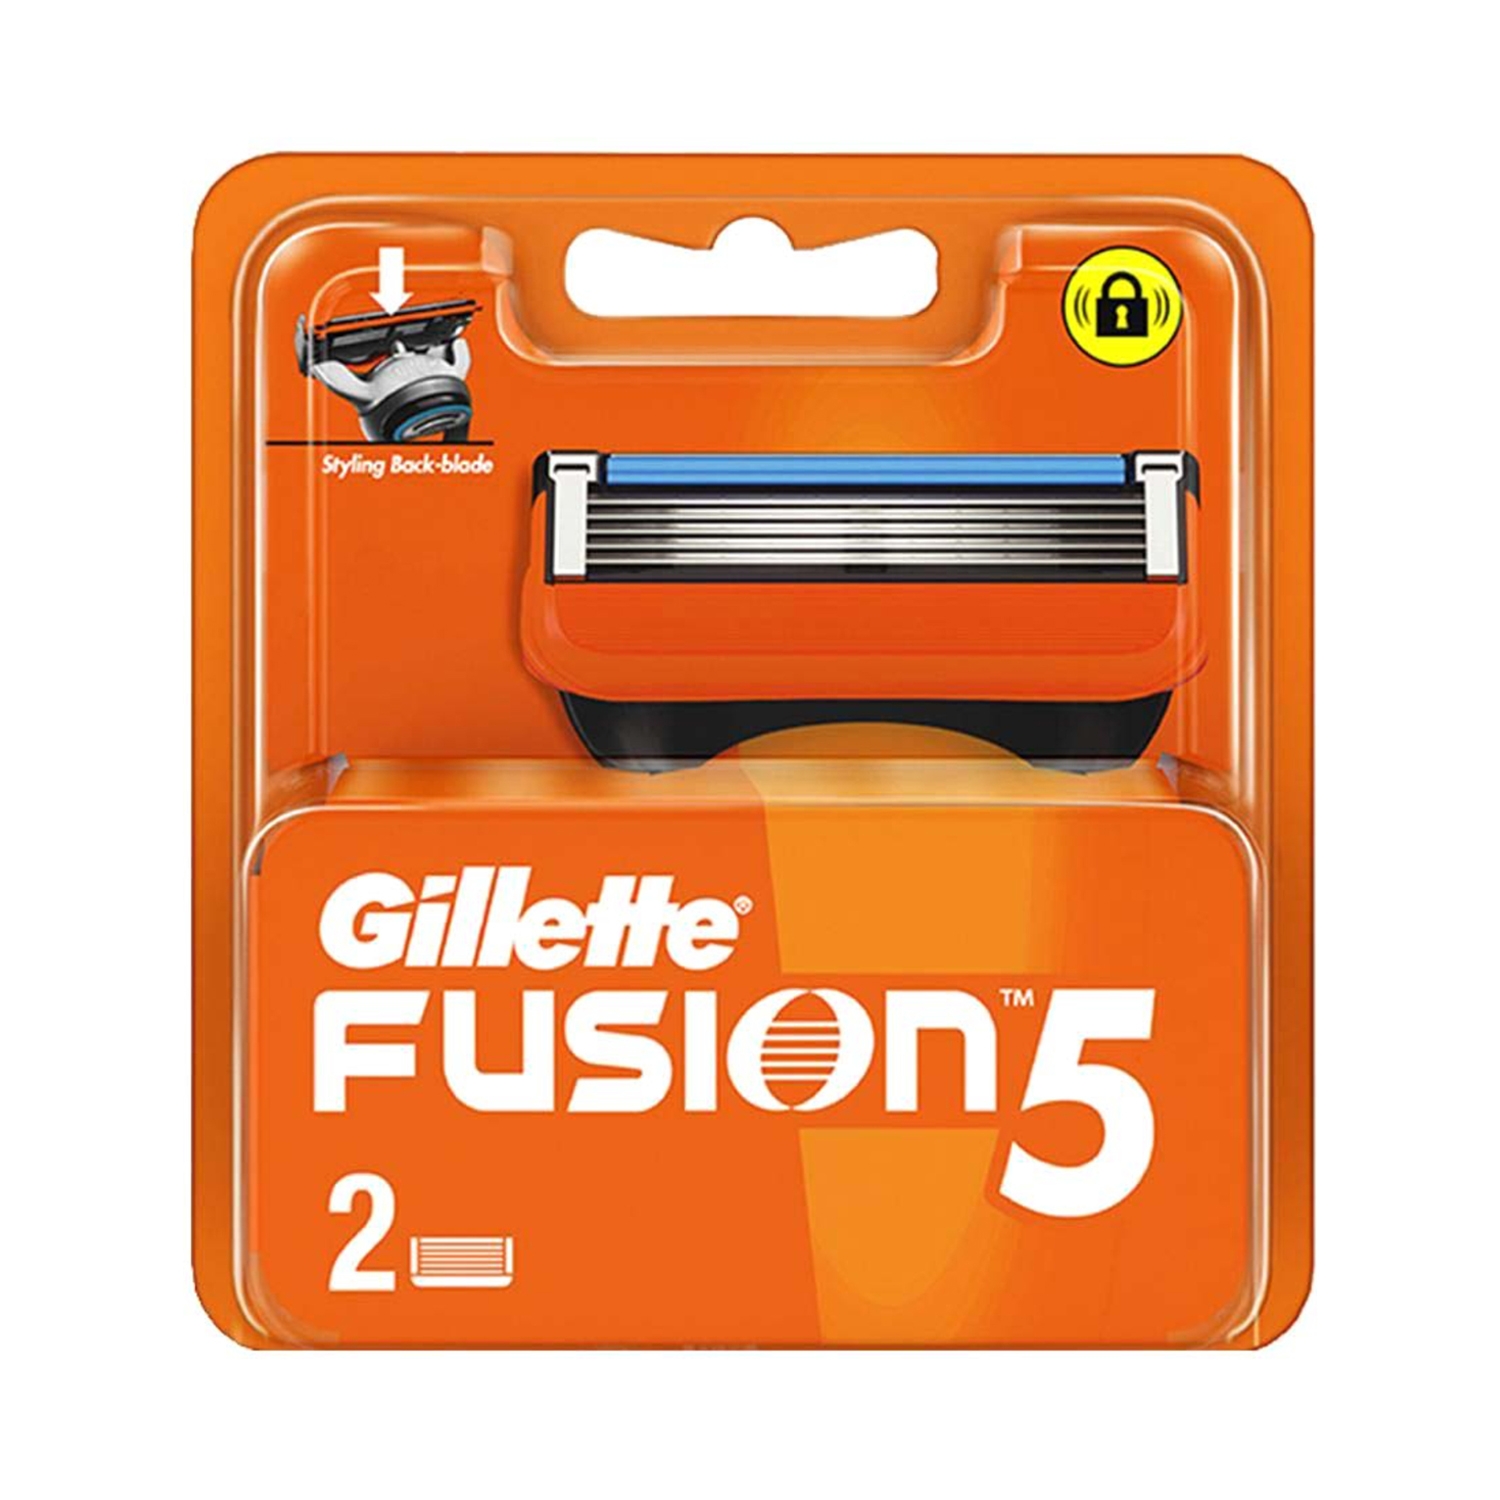 Gillette | Gillette Fusion Manual Blades for Perfect Shave and Perfect Beard Shape (2Pcs)